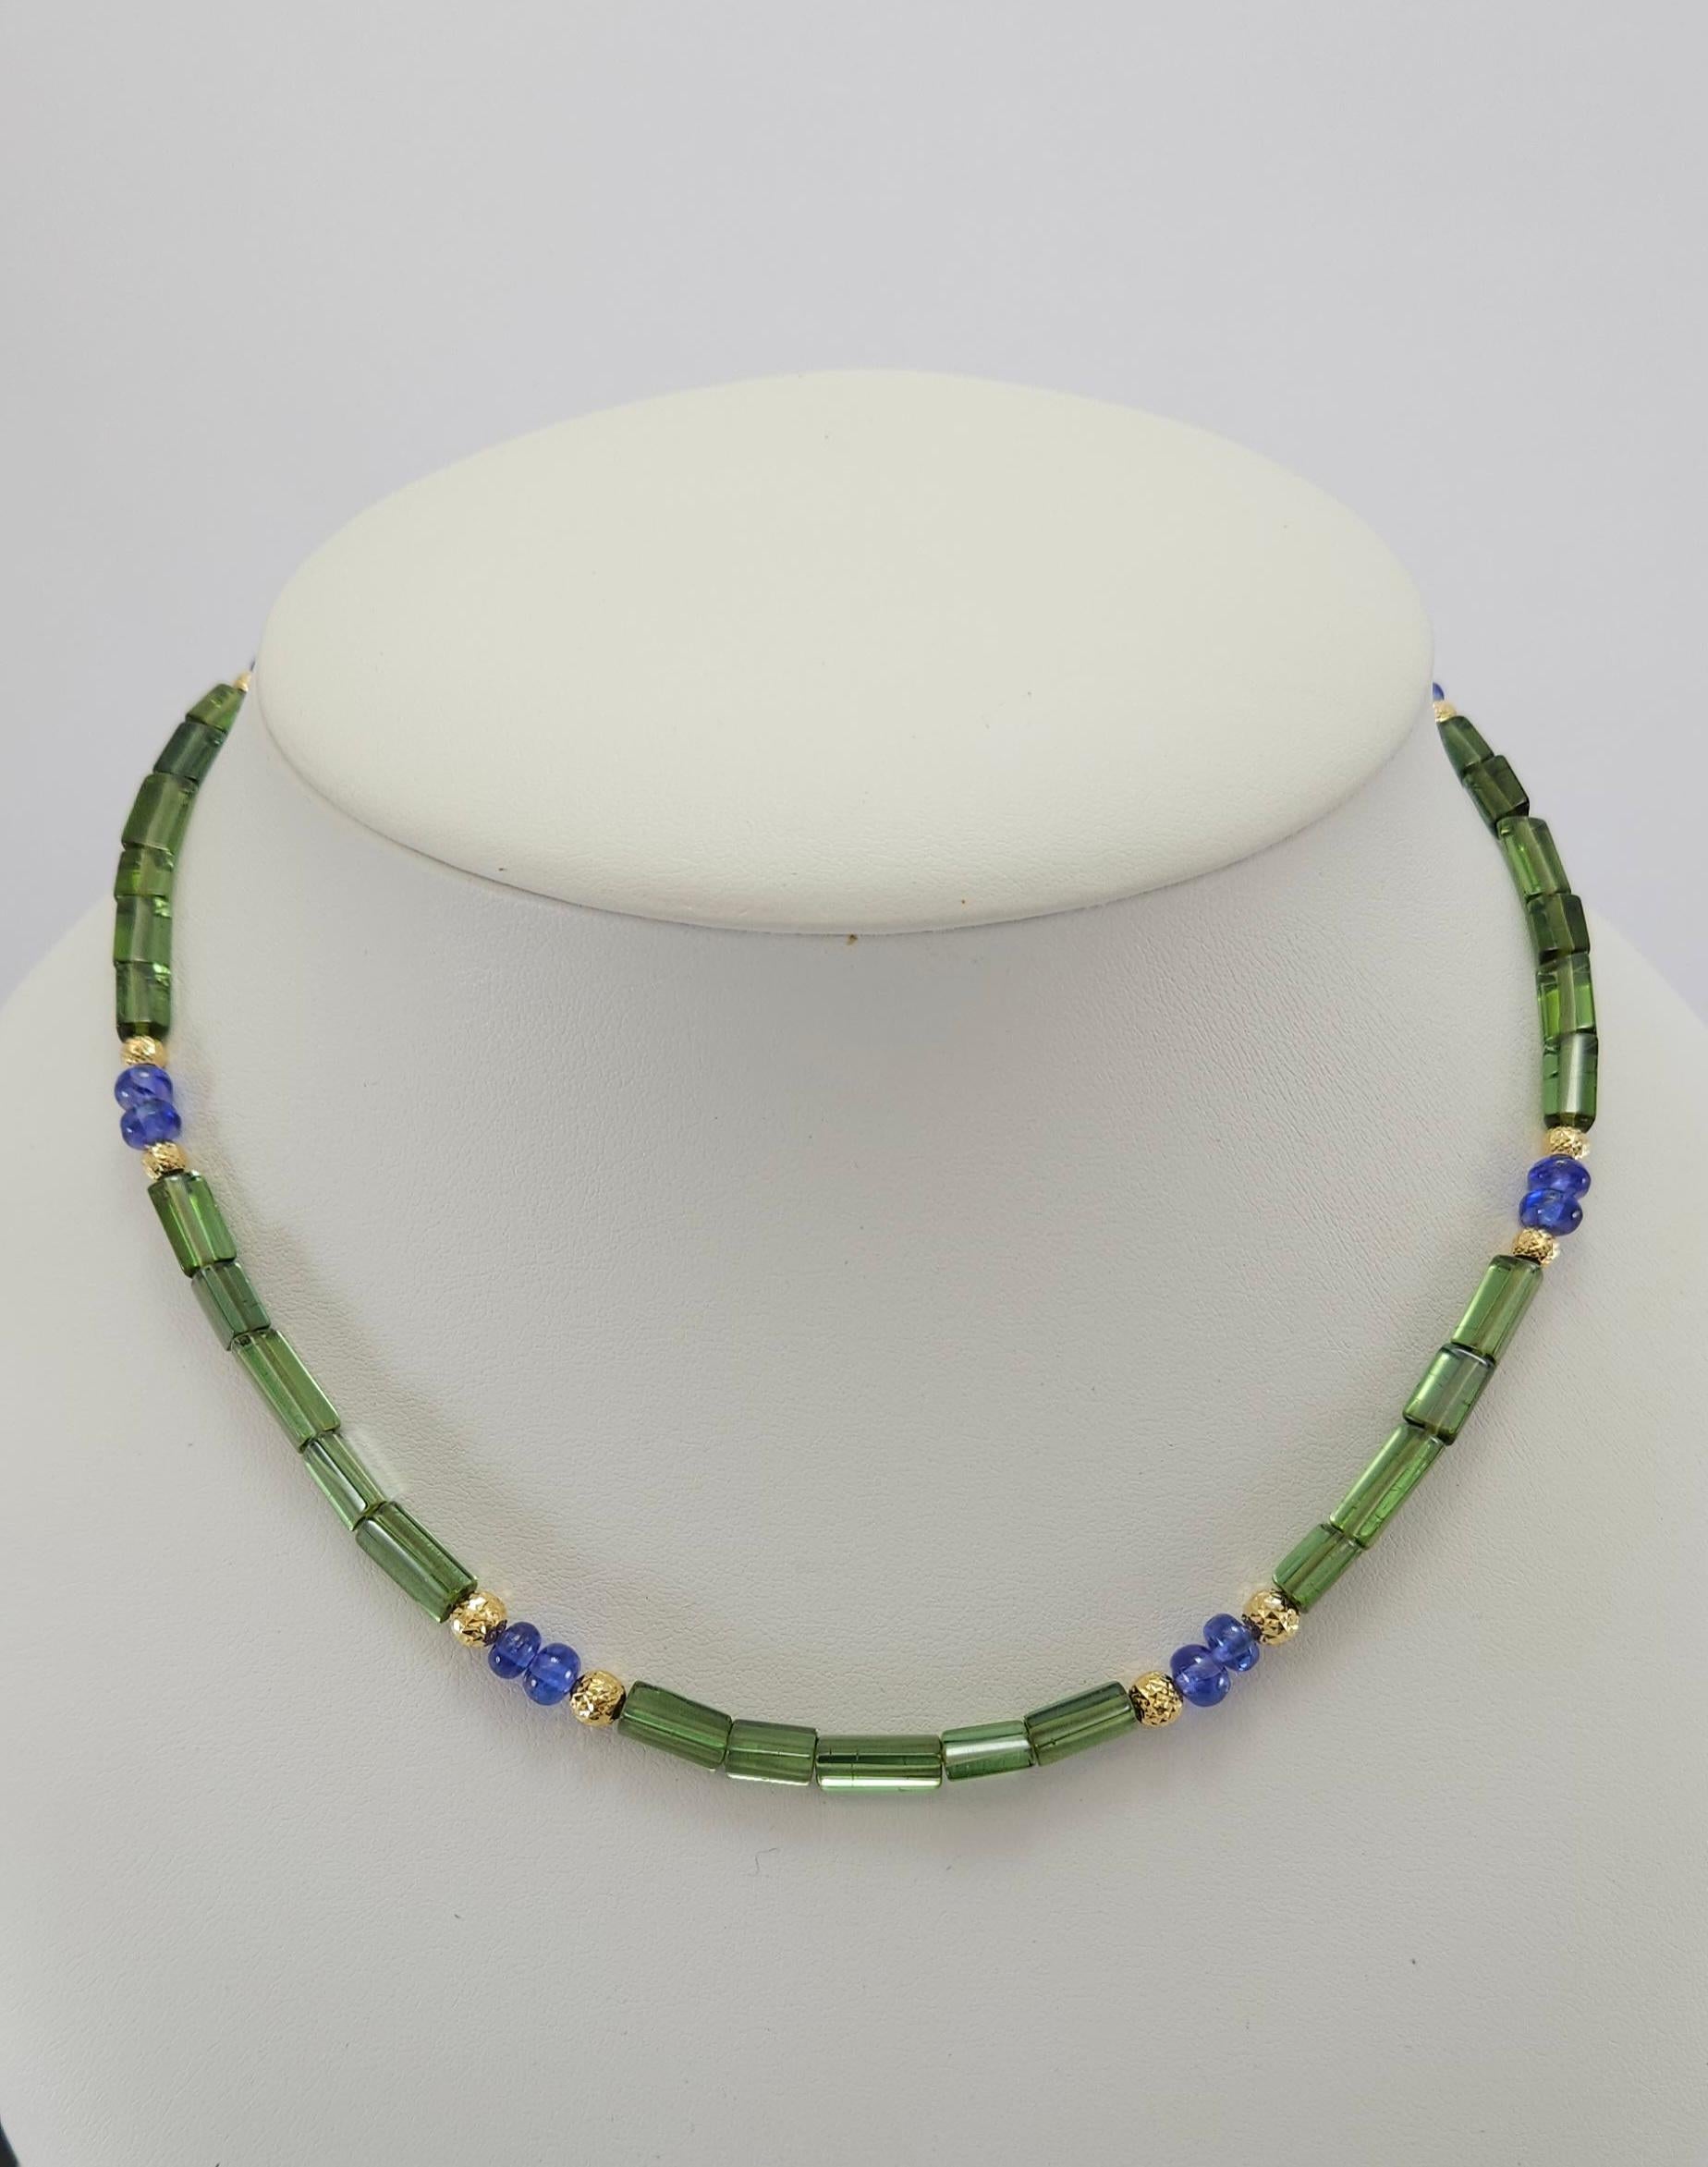 This Natural Green Tourmaline Crystal & Tanzanite Rondel Necklace with 18 Carat yellow Gold is handcut and made in German quality.
The screw clasp is easy to handle and very secure. The triangular shape was taken from the natural crystals of